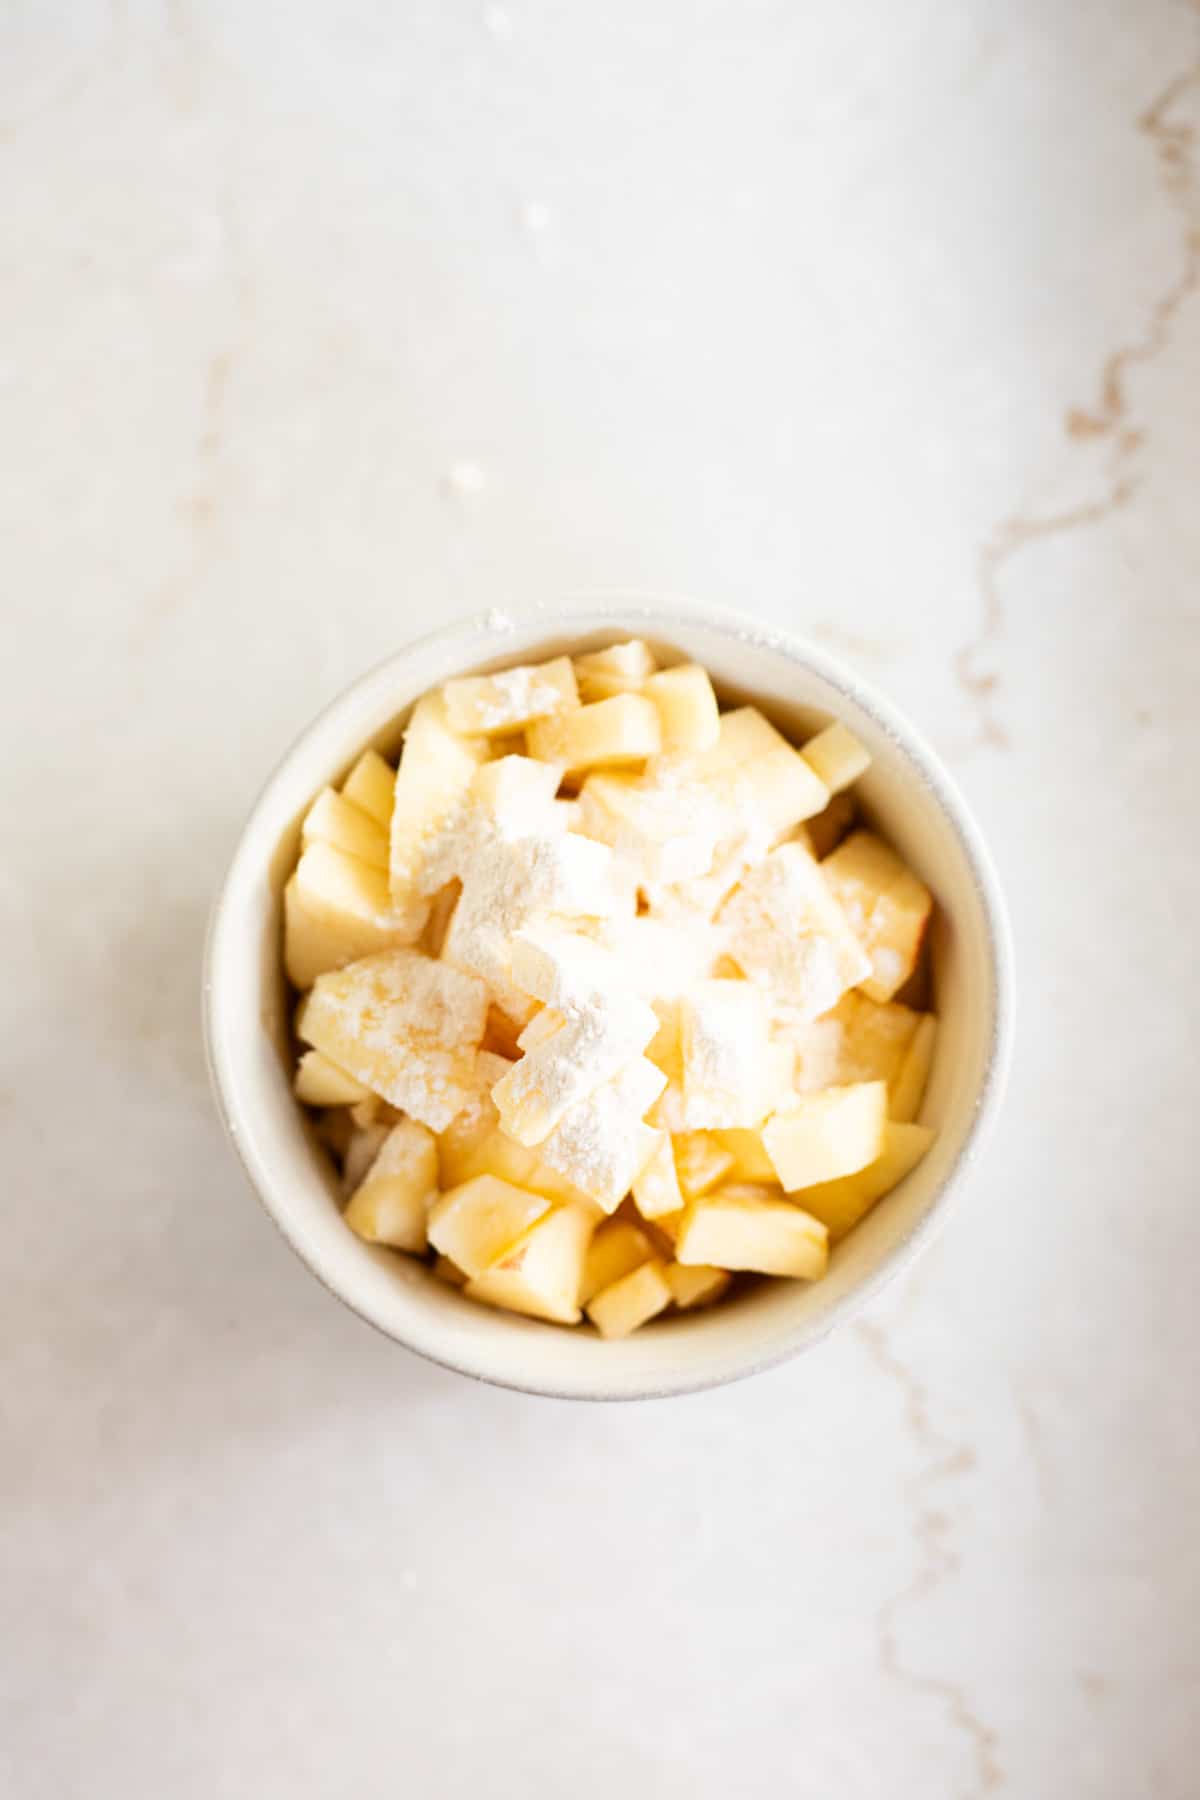 diced apples tossed in flour.